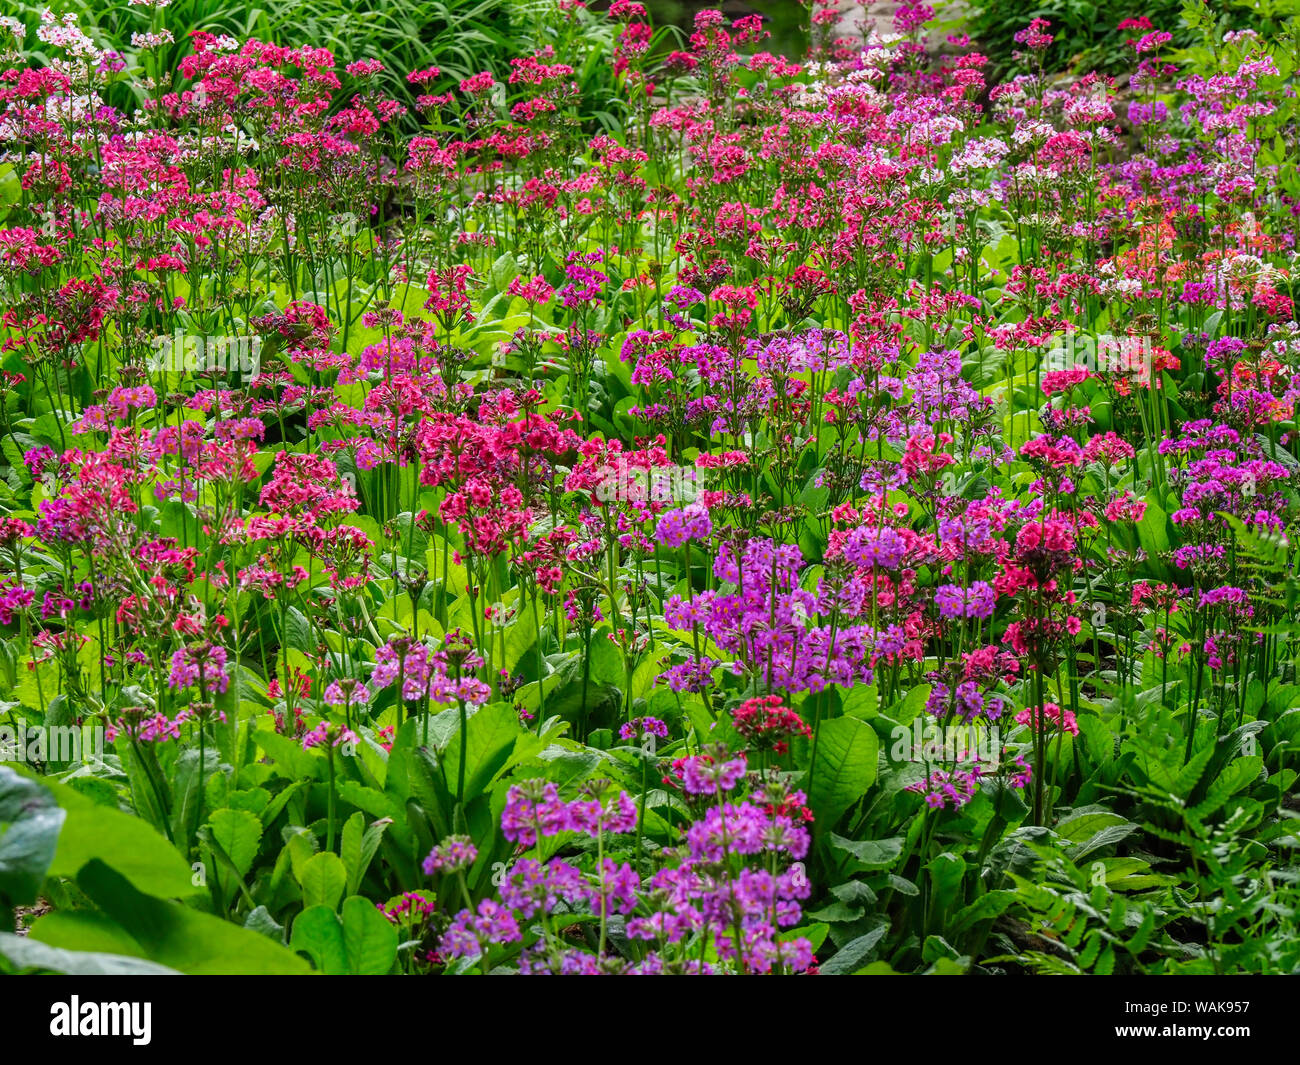 USA, Delaware. A very boggy quarry garden with giant Candelabra primroses, Primula x bulleesiana hybrid. Stock Photo